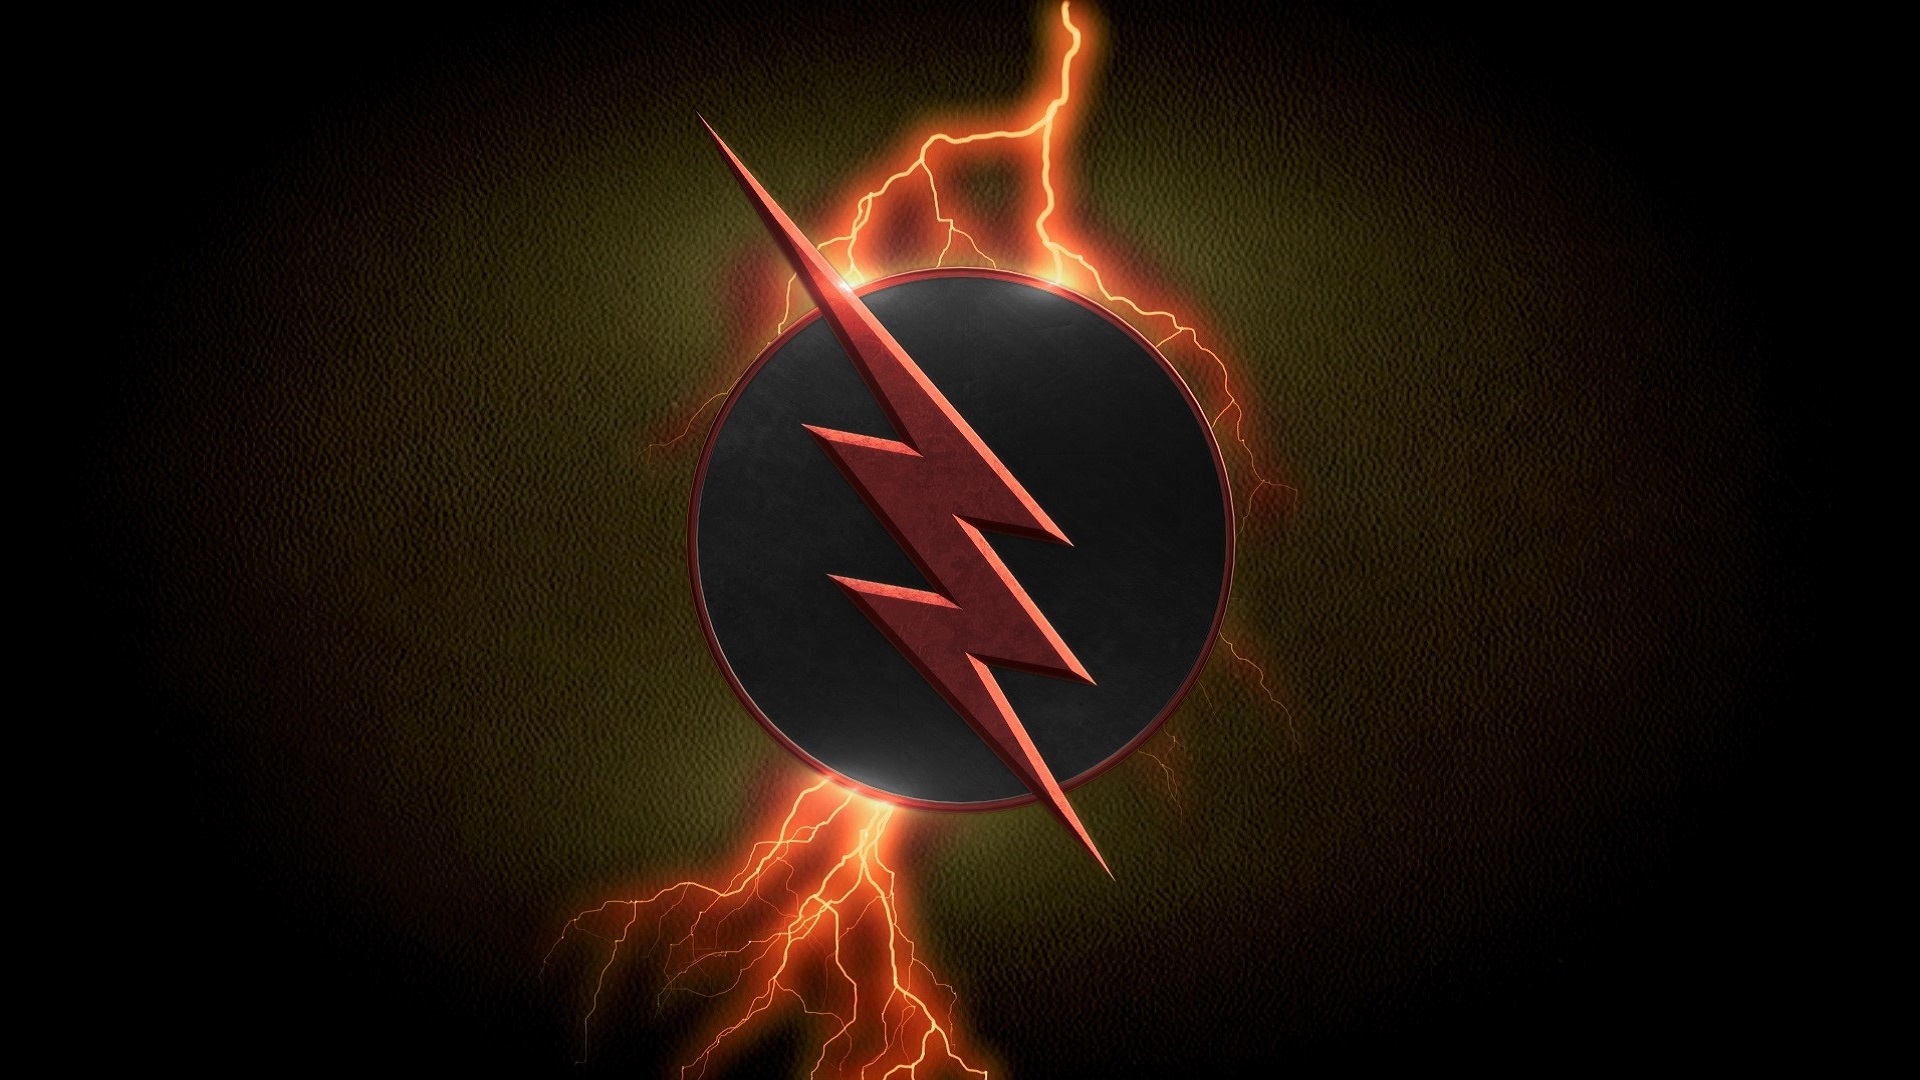 the flash wallpaper 1920x1080,flame,heat,font,darkness,graphics